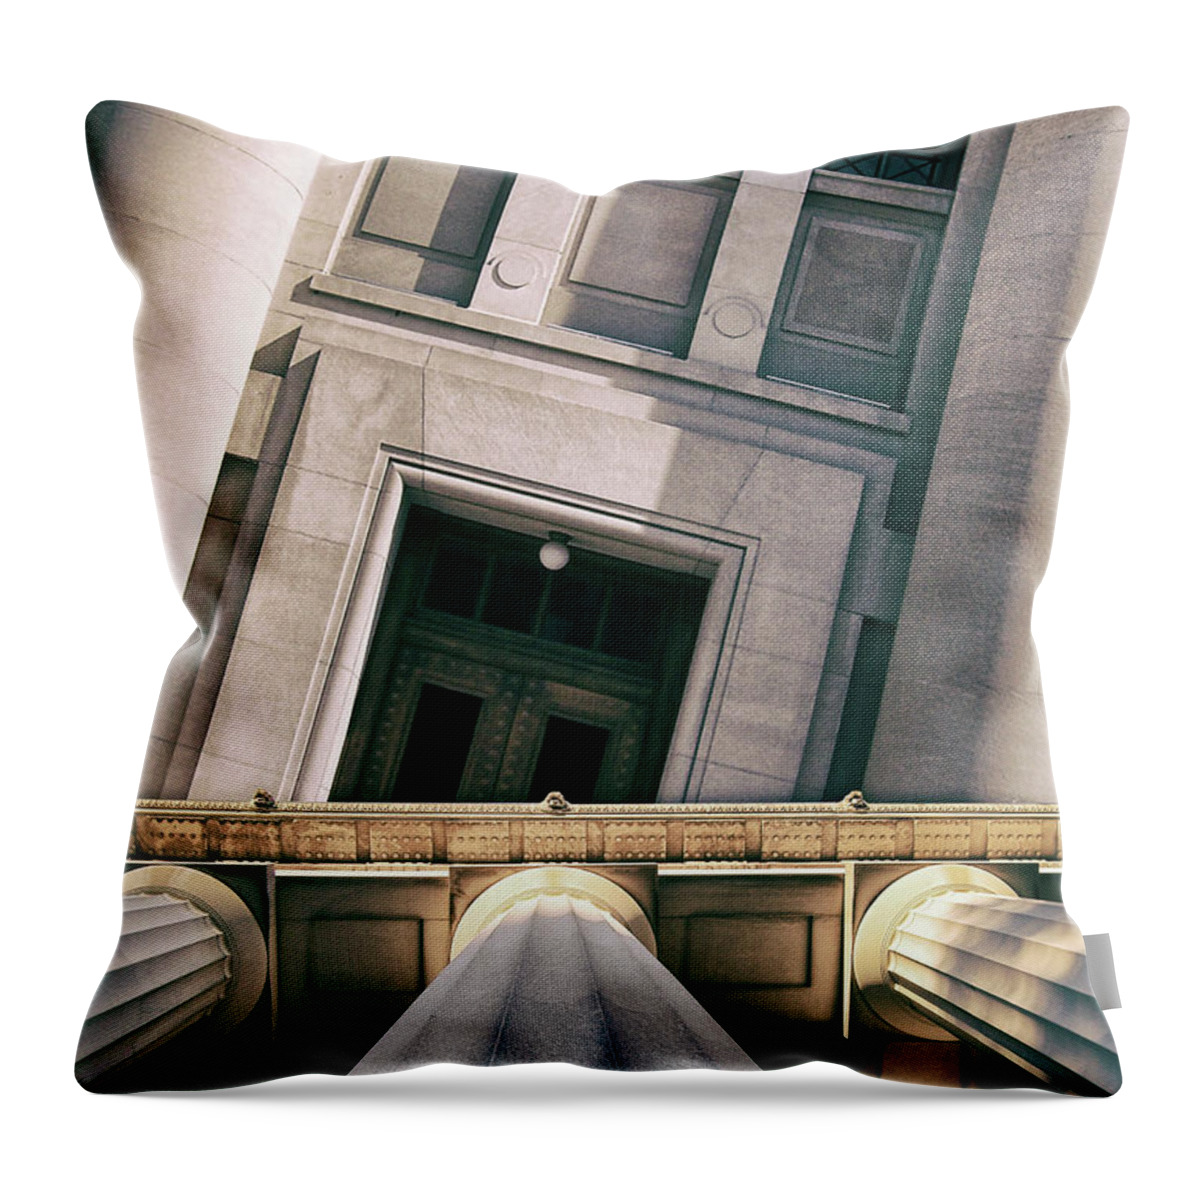 Neo Classical Throw Pillow featuring the digital art Neo Classical Collage by Phil Perkins